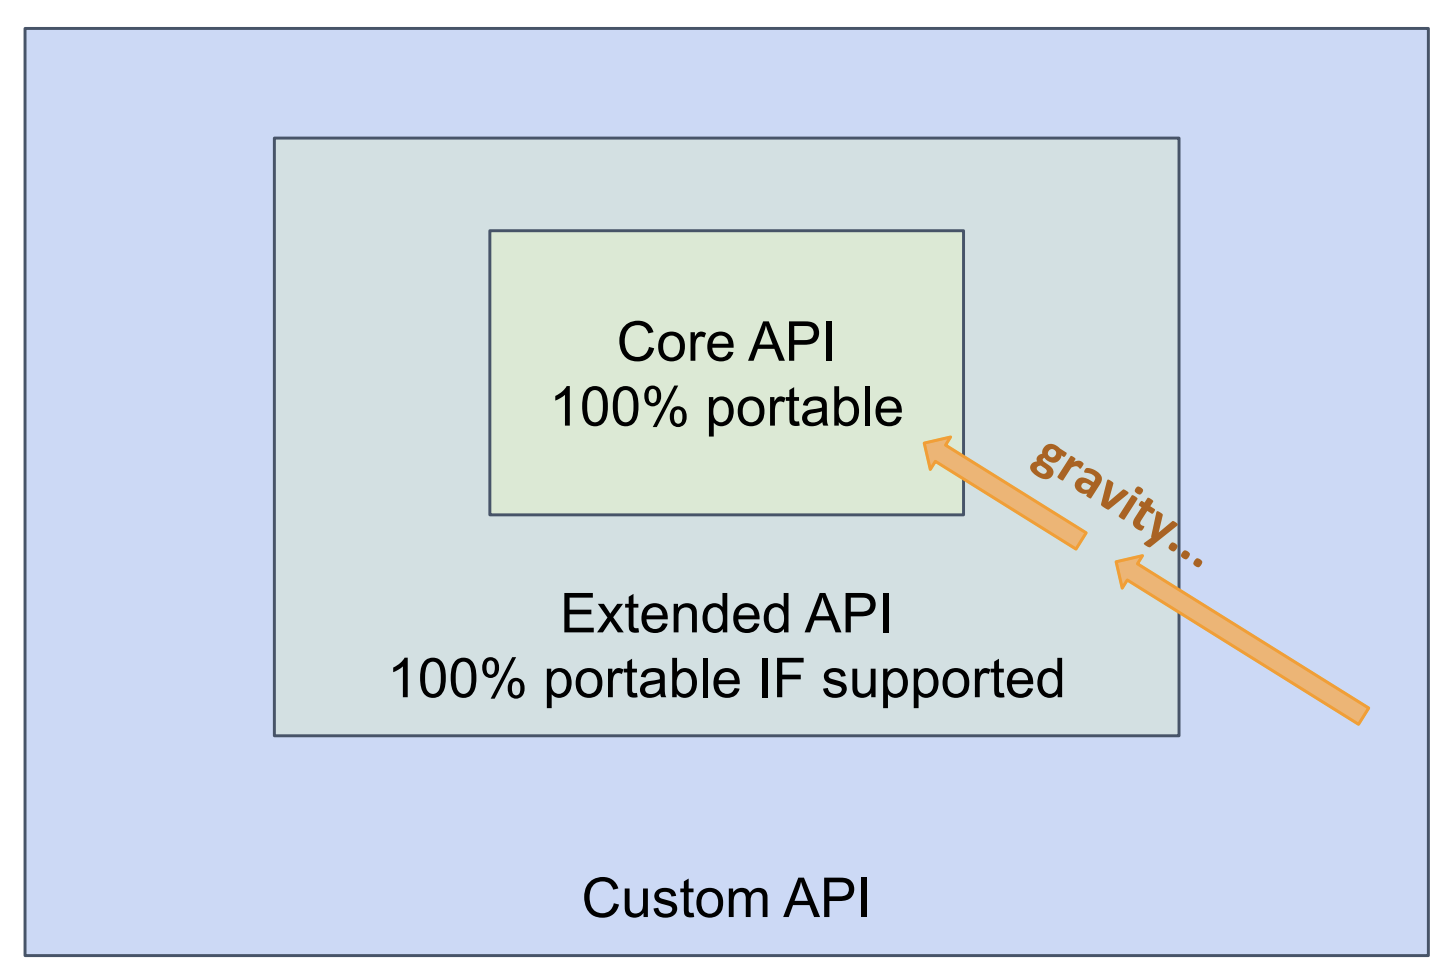 Diagram showing proposed Custom API support levels